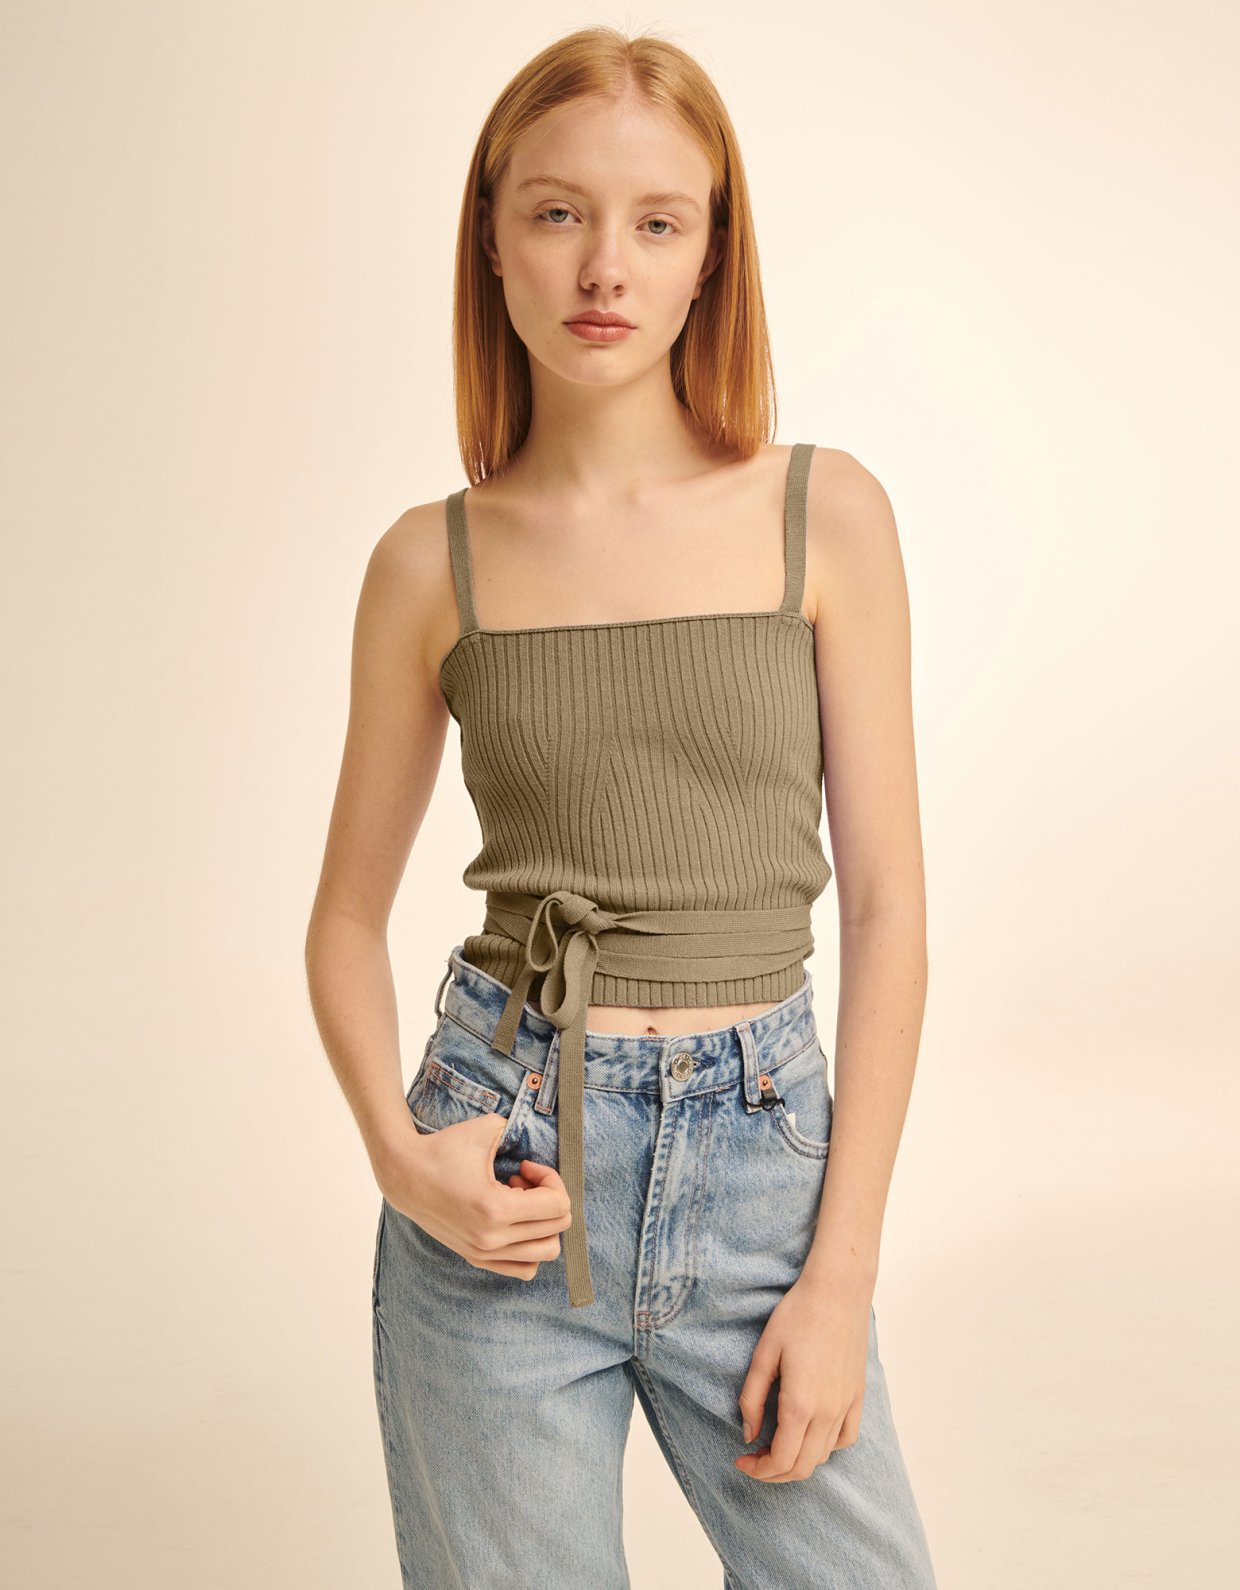 Combos Knitwear Combos S002 – Knitted top cord beige